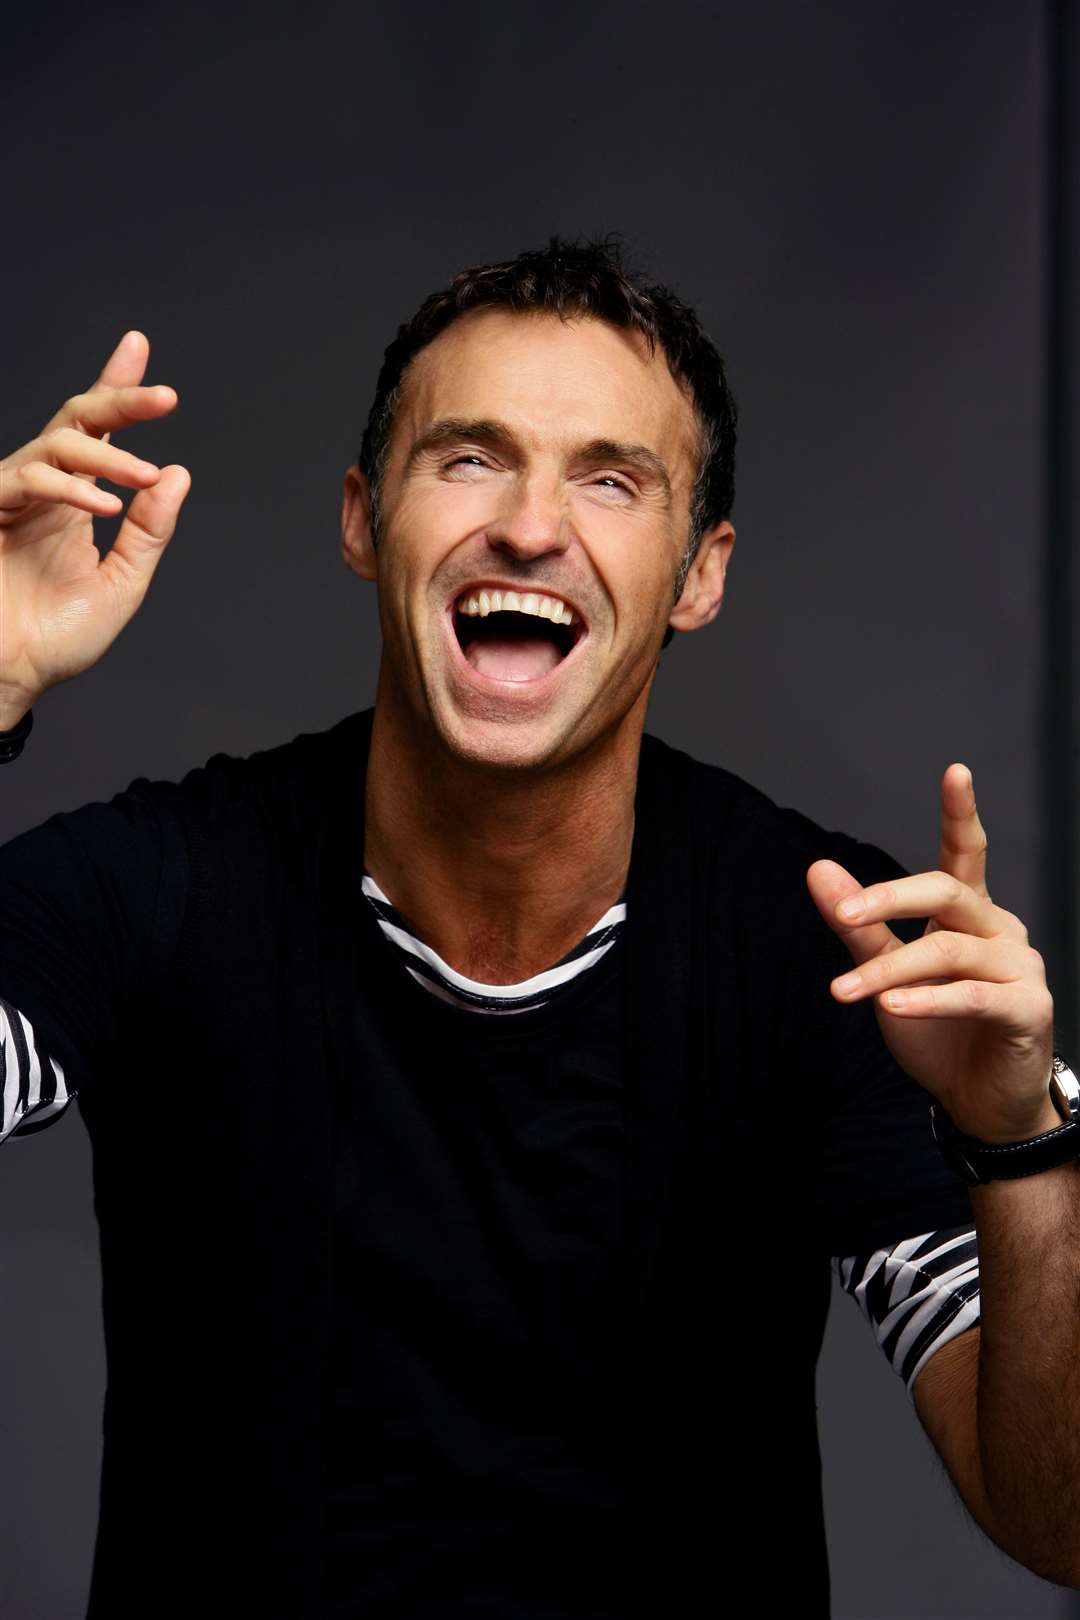 Marti Pellow was back in Inverness – one of his favourite places – yesterday tucking into a tasty treat.